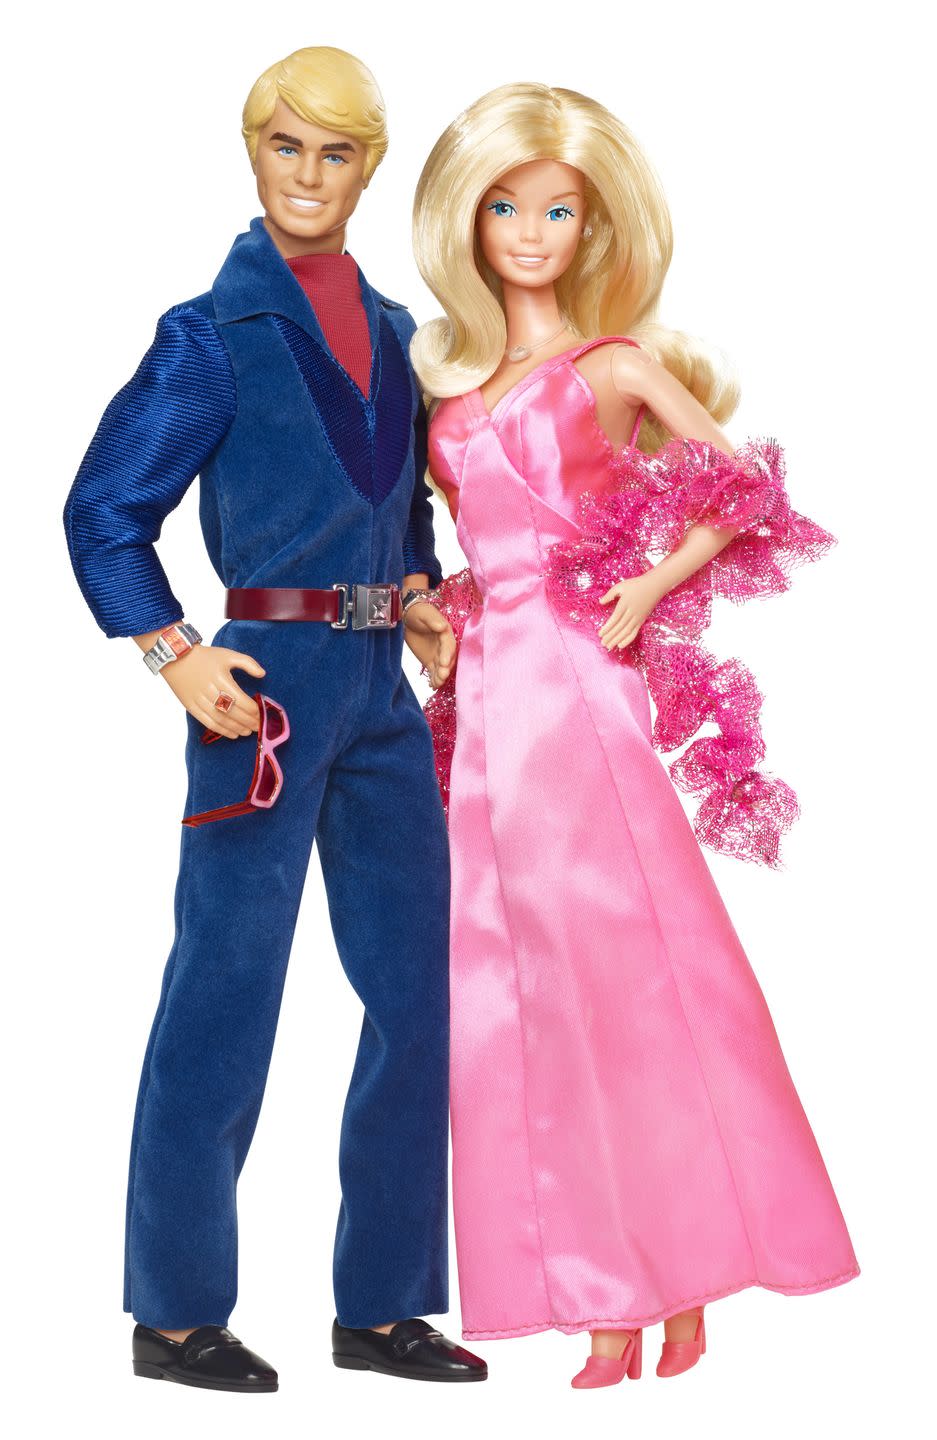 Doll, Barbie, Toy, Clothing, Pink, Blond, Costume, Jeans, Electric blue, Formal wear, 